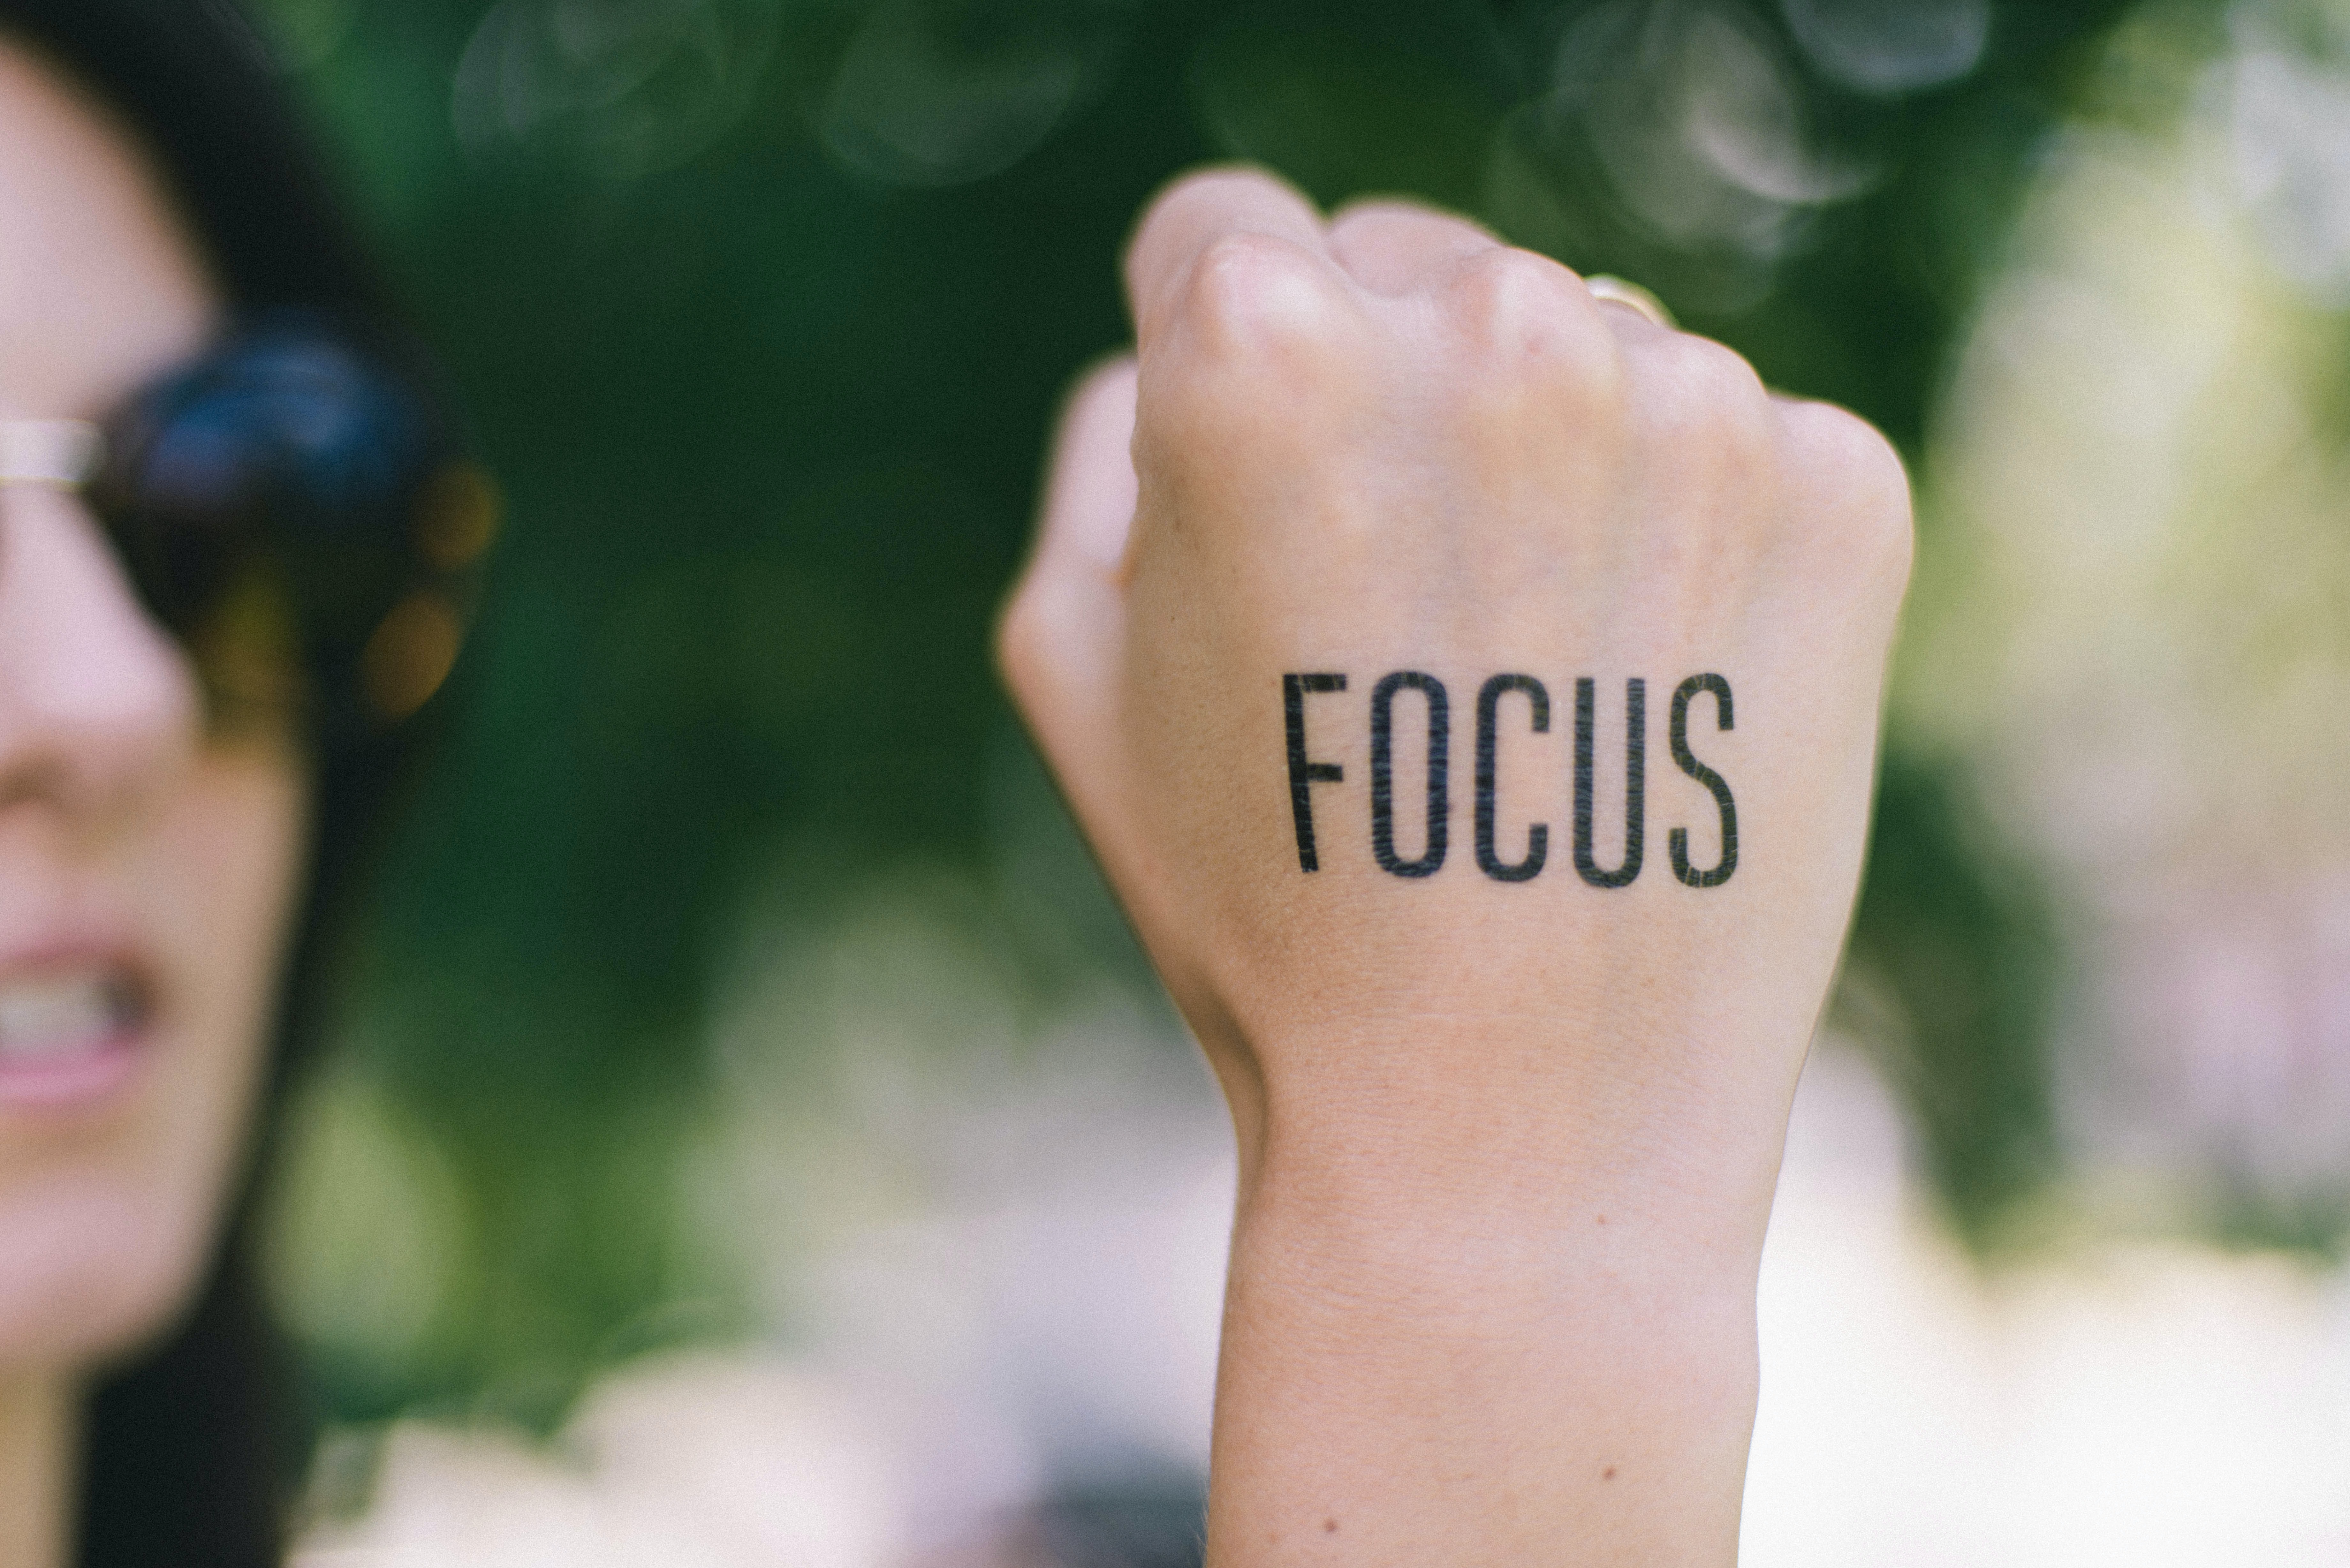 Focus written on persons hand